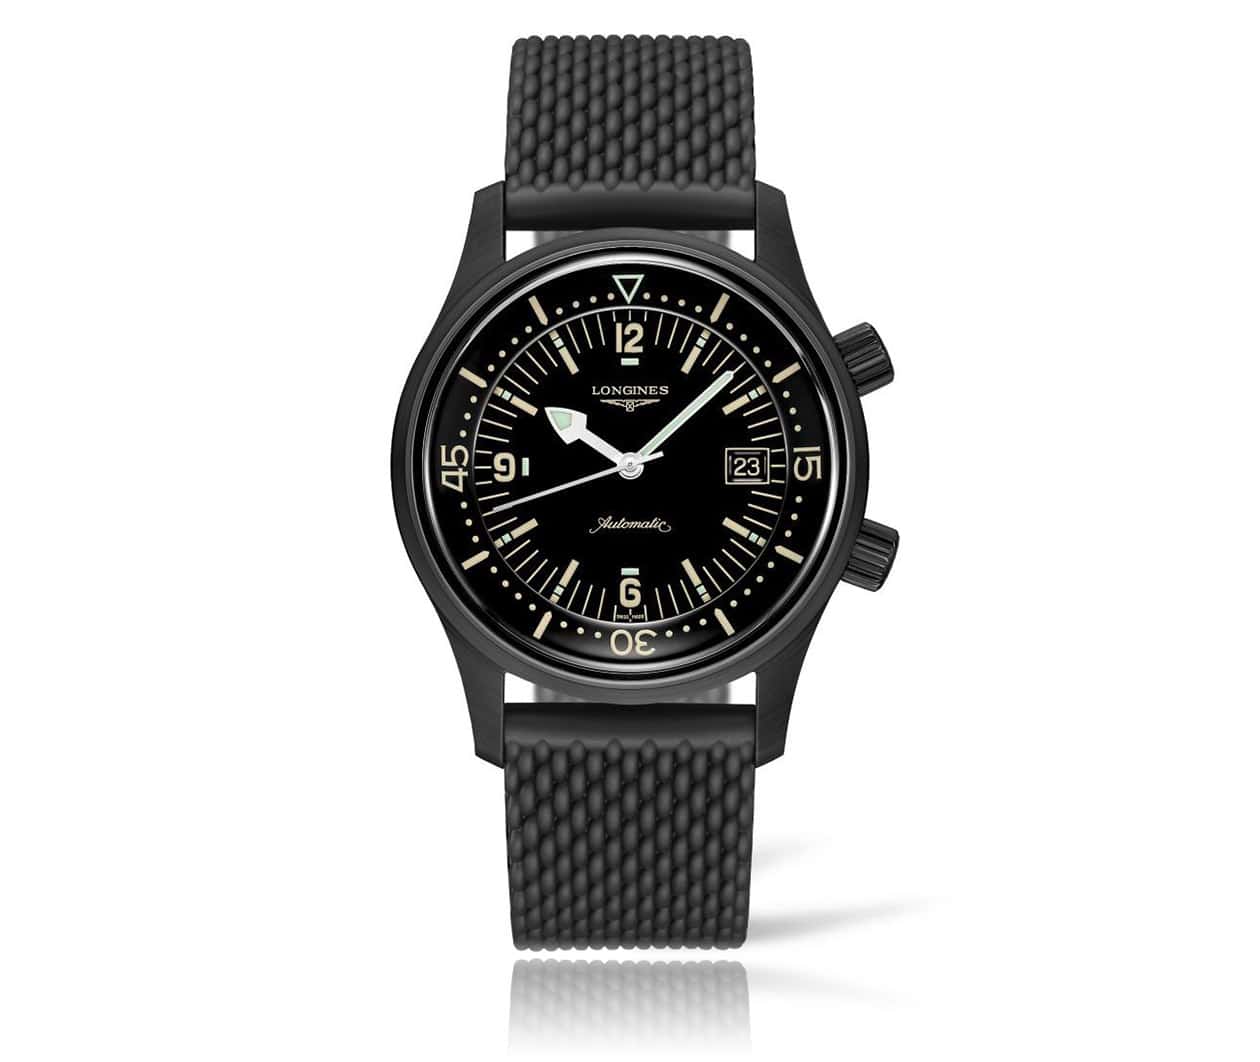 LONGINES THE LONGINES LEGEND DIVER WATCH THE LONGINES LEGEND DIVER WATCH L37742509 flatlay